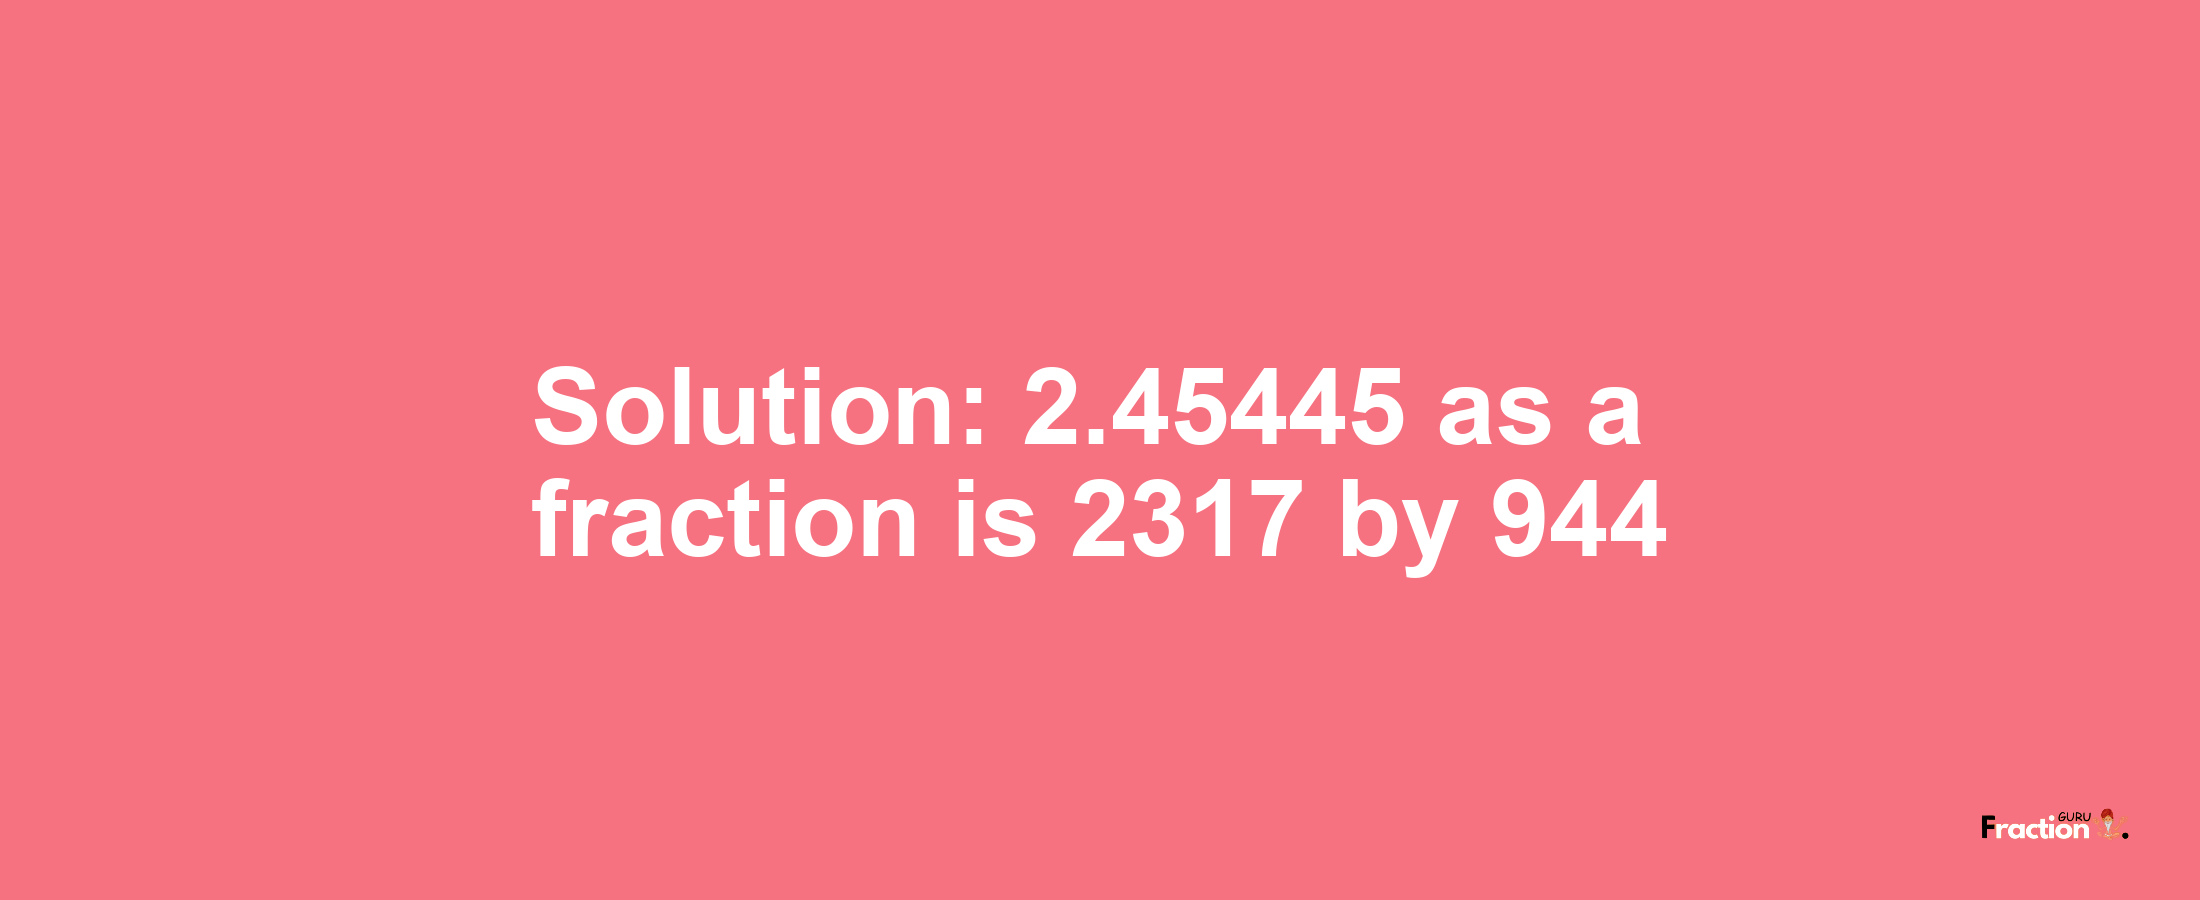 Solution:2.45445 as a fraction is 2317/944